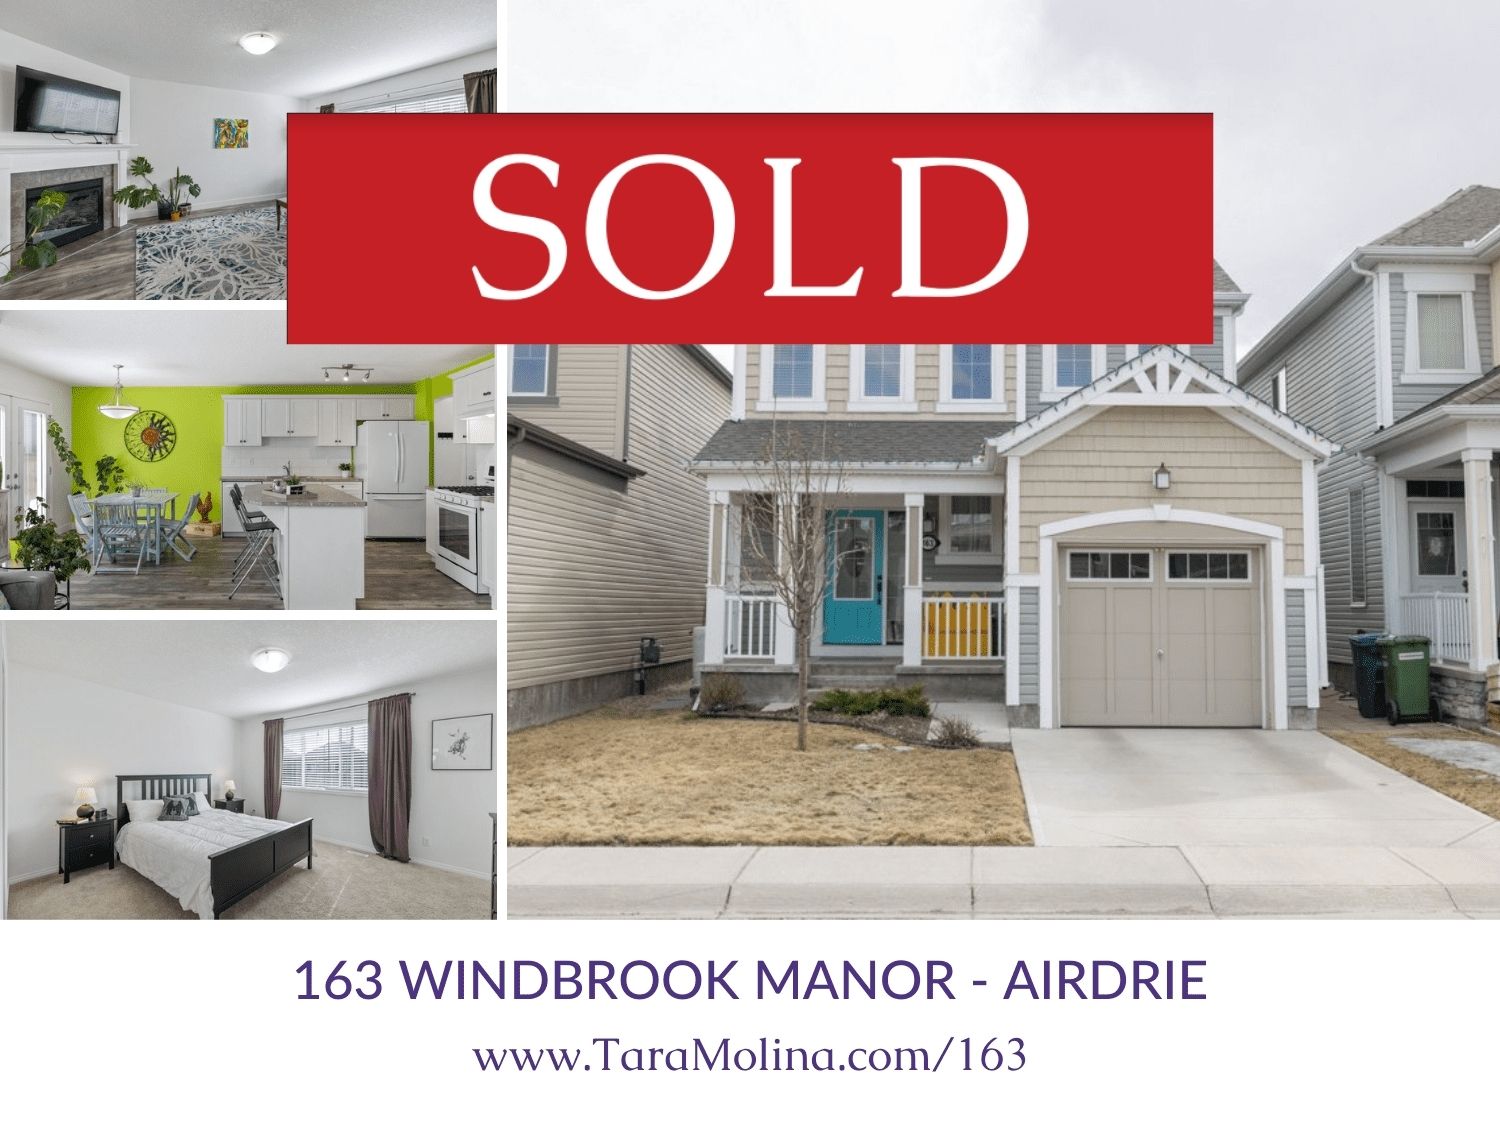 Sold by Tara Molina - Realtor in Airdrie